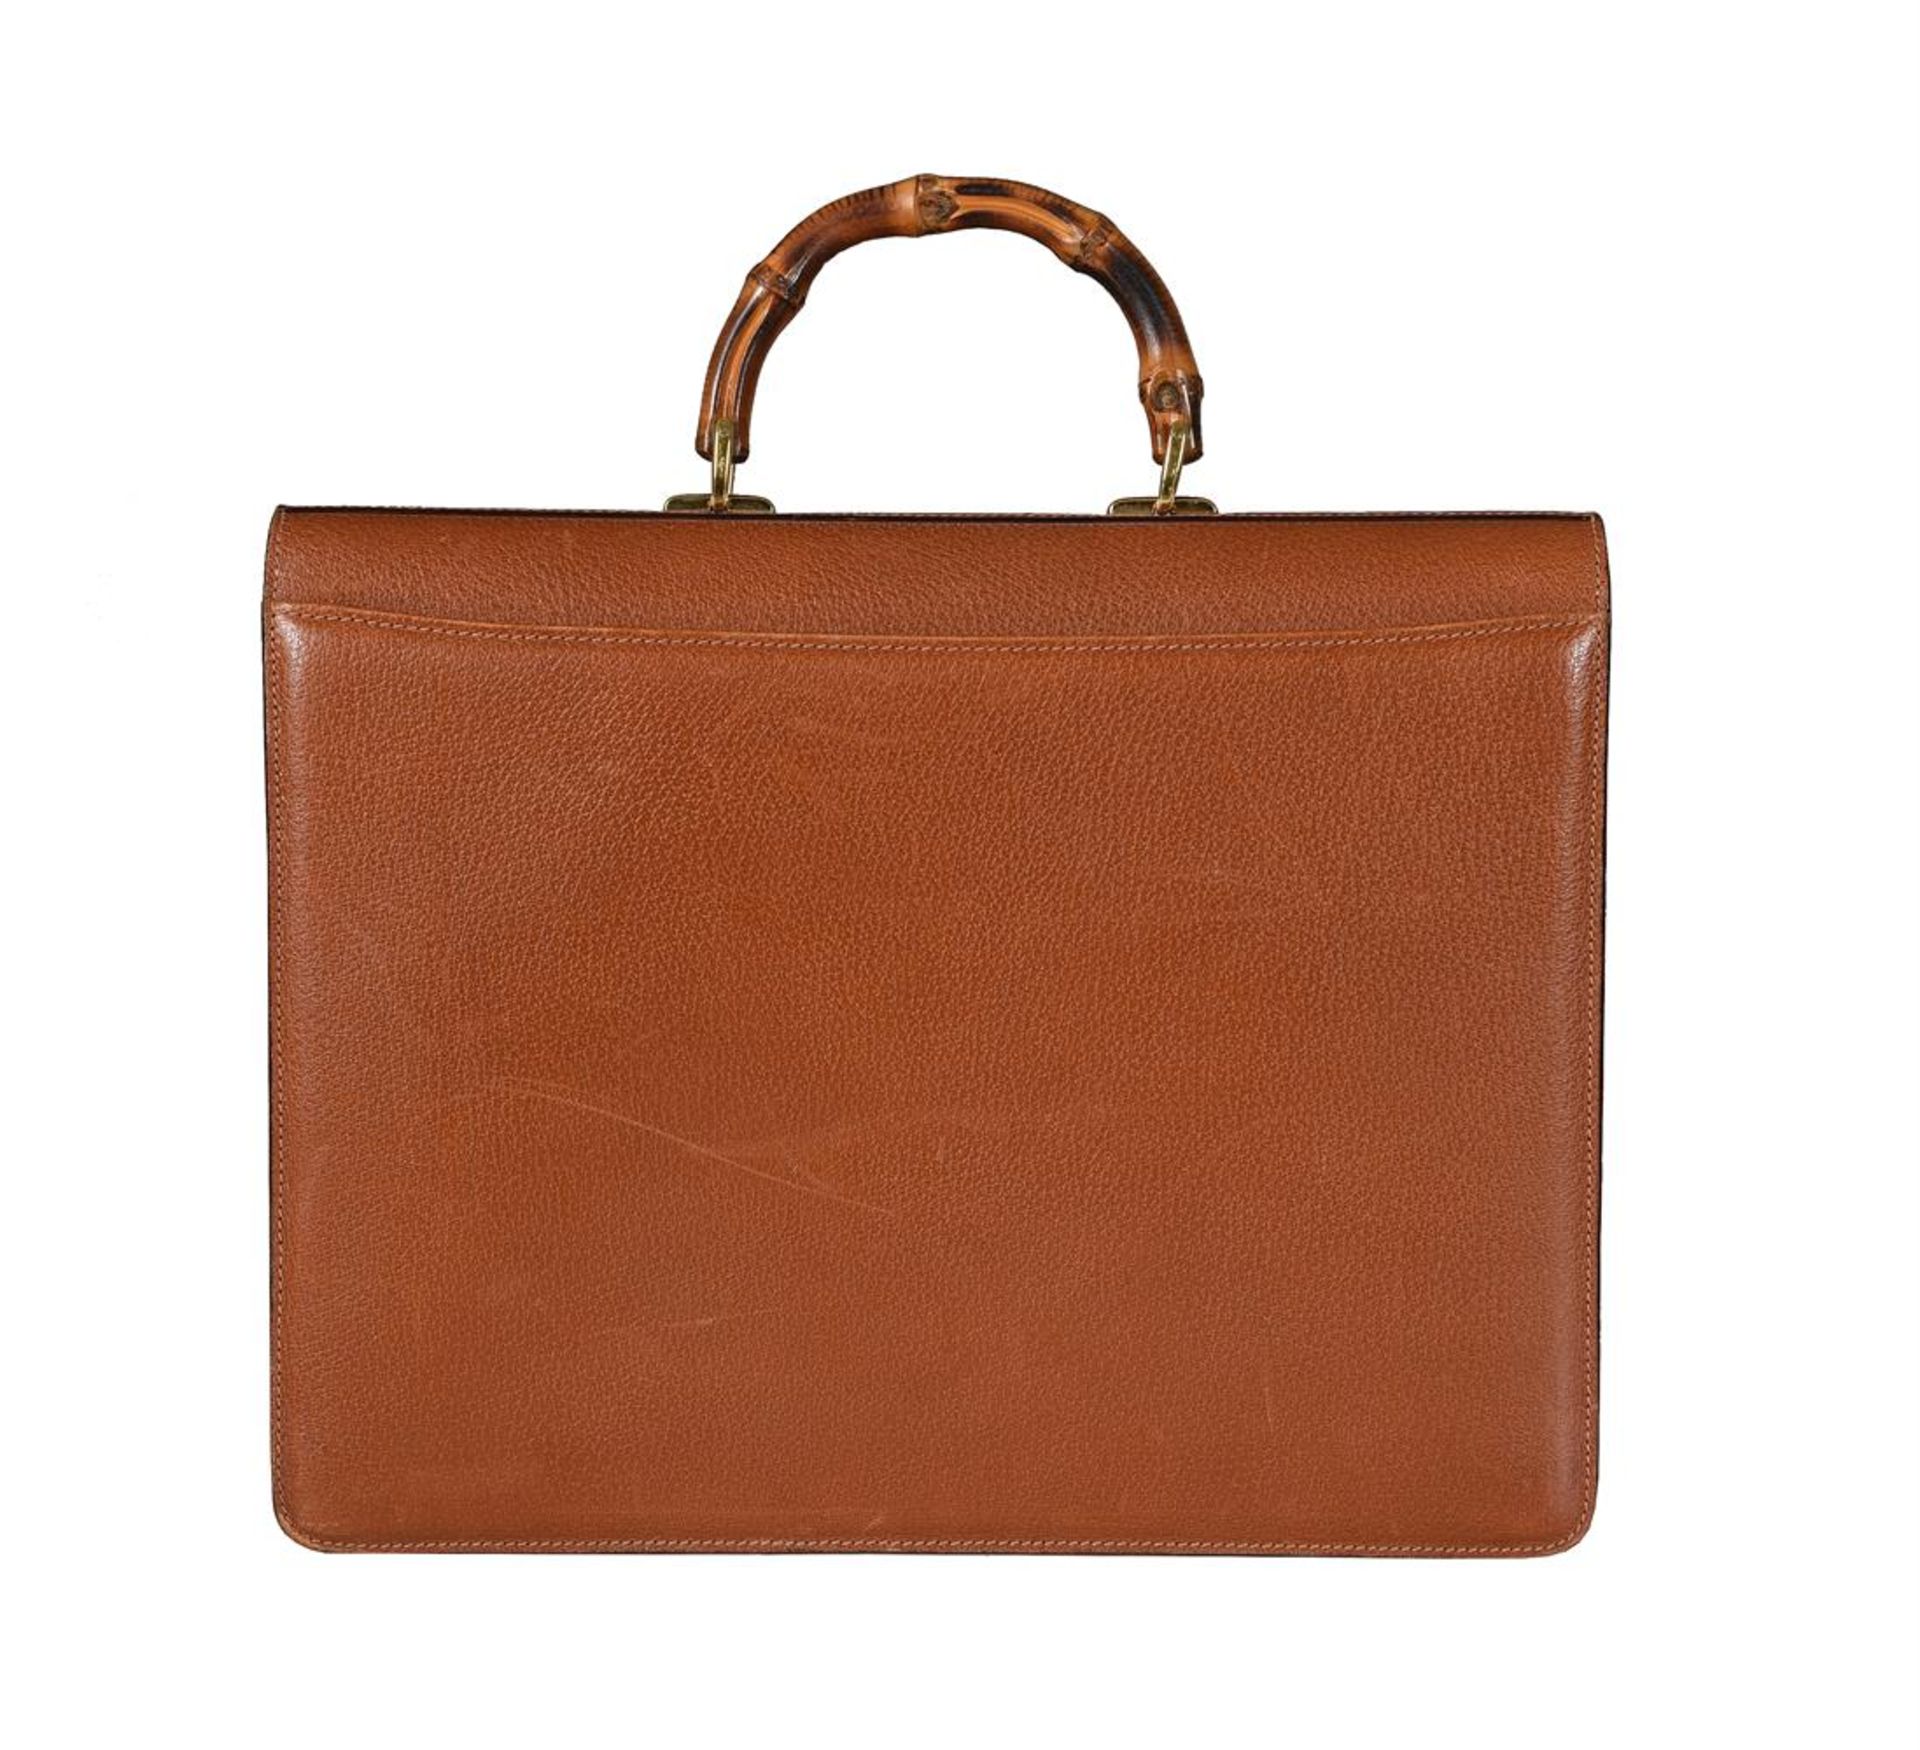 GUCCI, A VINTAGE TAN LEATHER AND BAMBOO BRIEFCASE - Image 2 of 5